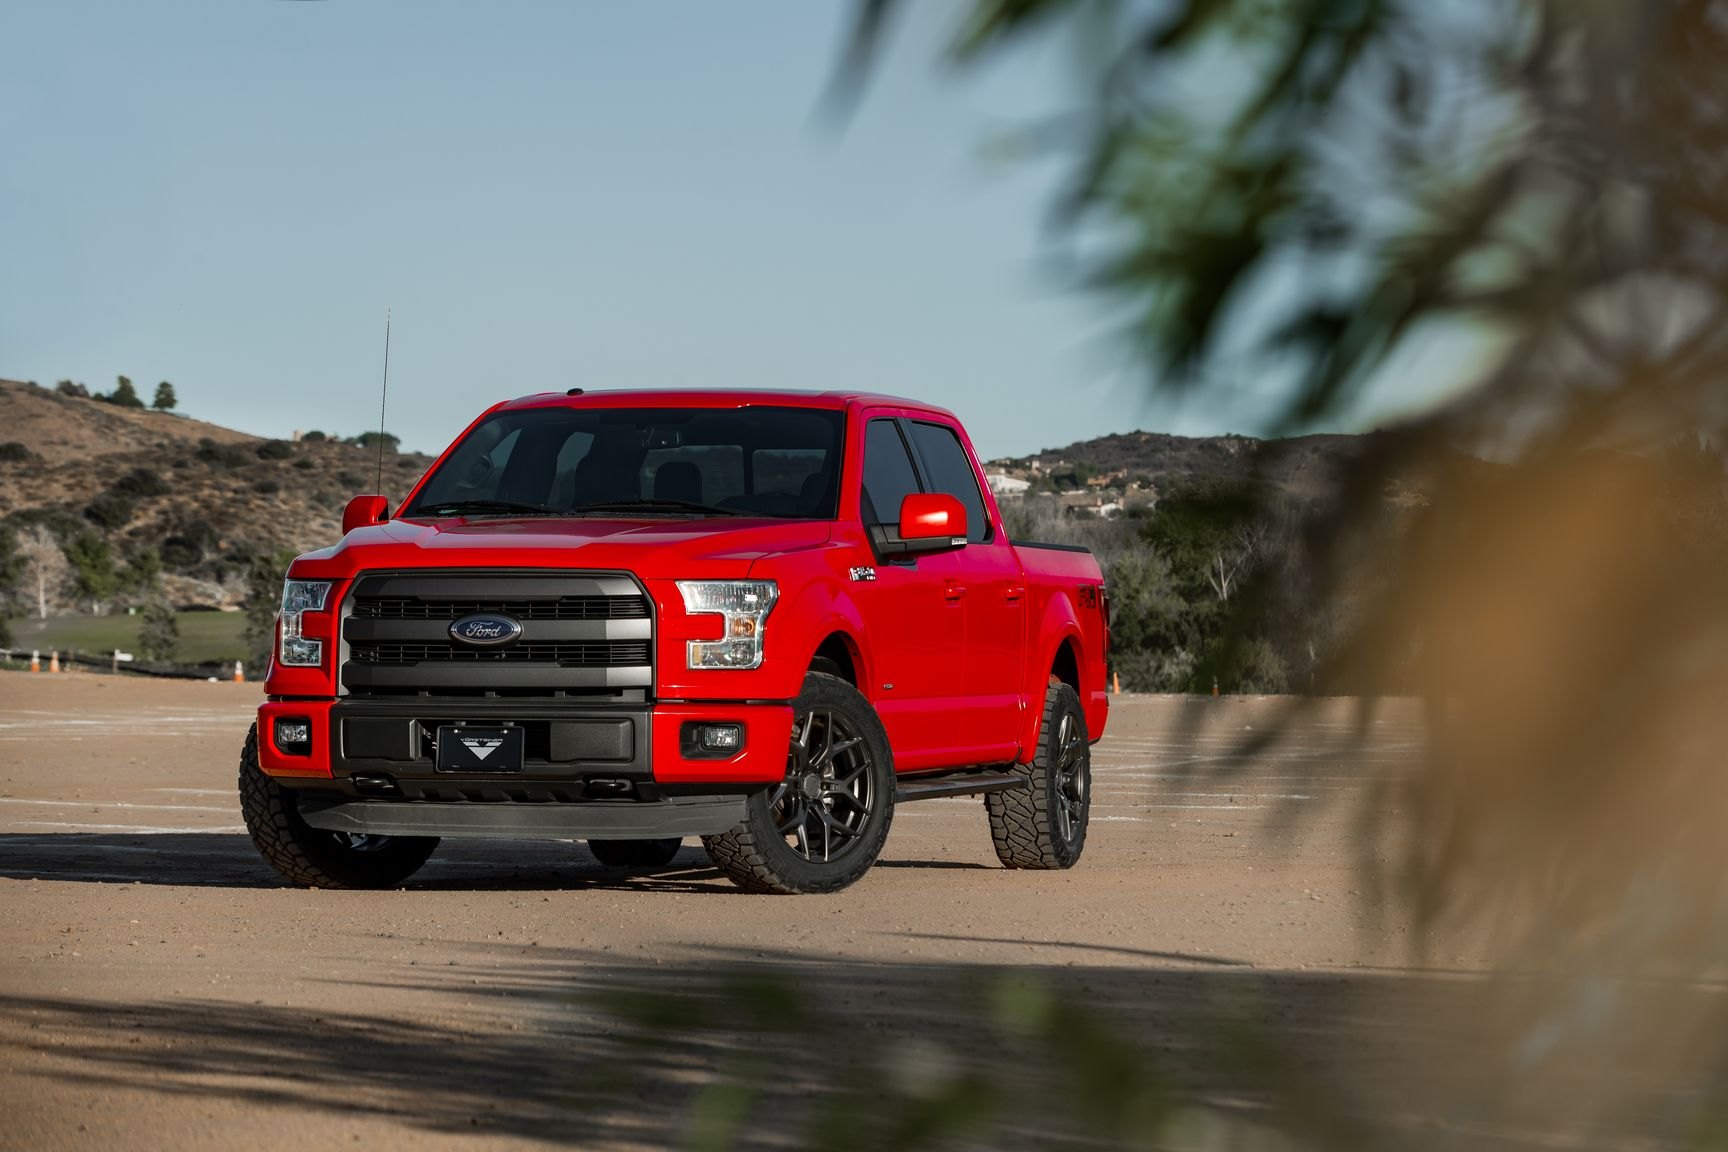 Red Ford F-150 with Aftermarket Projector Headlights - Photo by Venom Rex